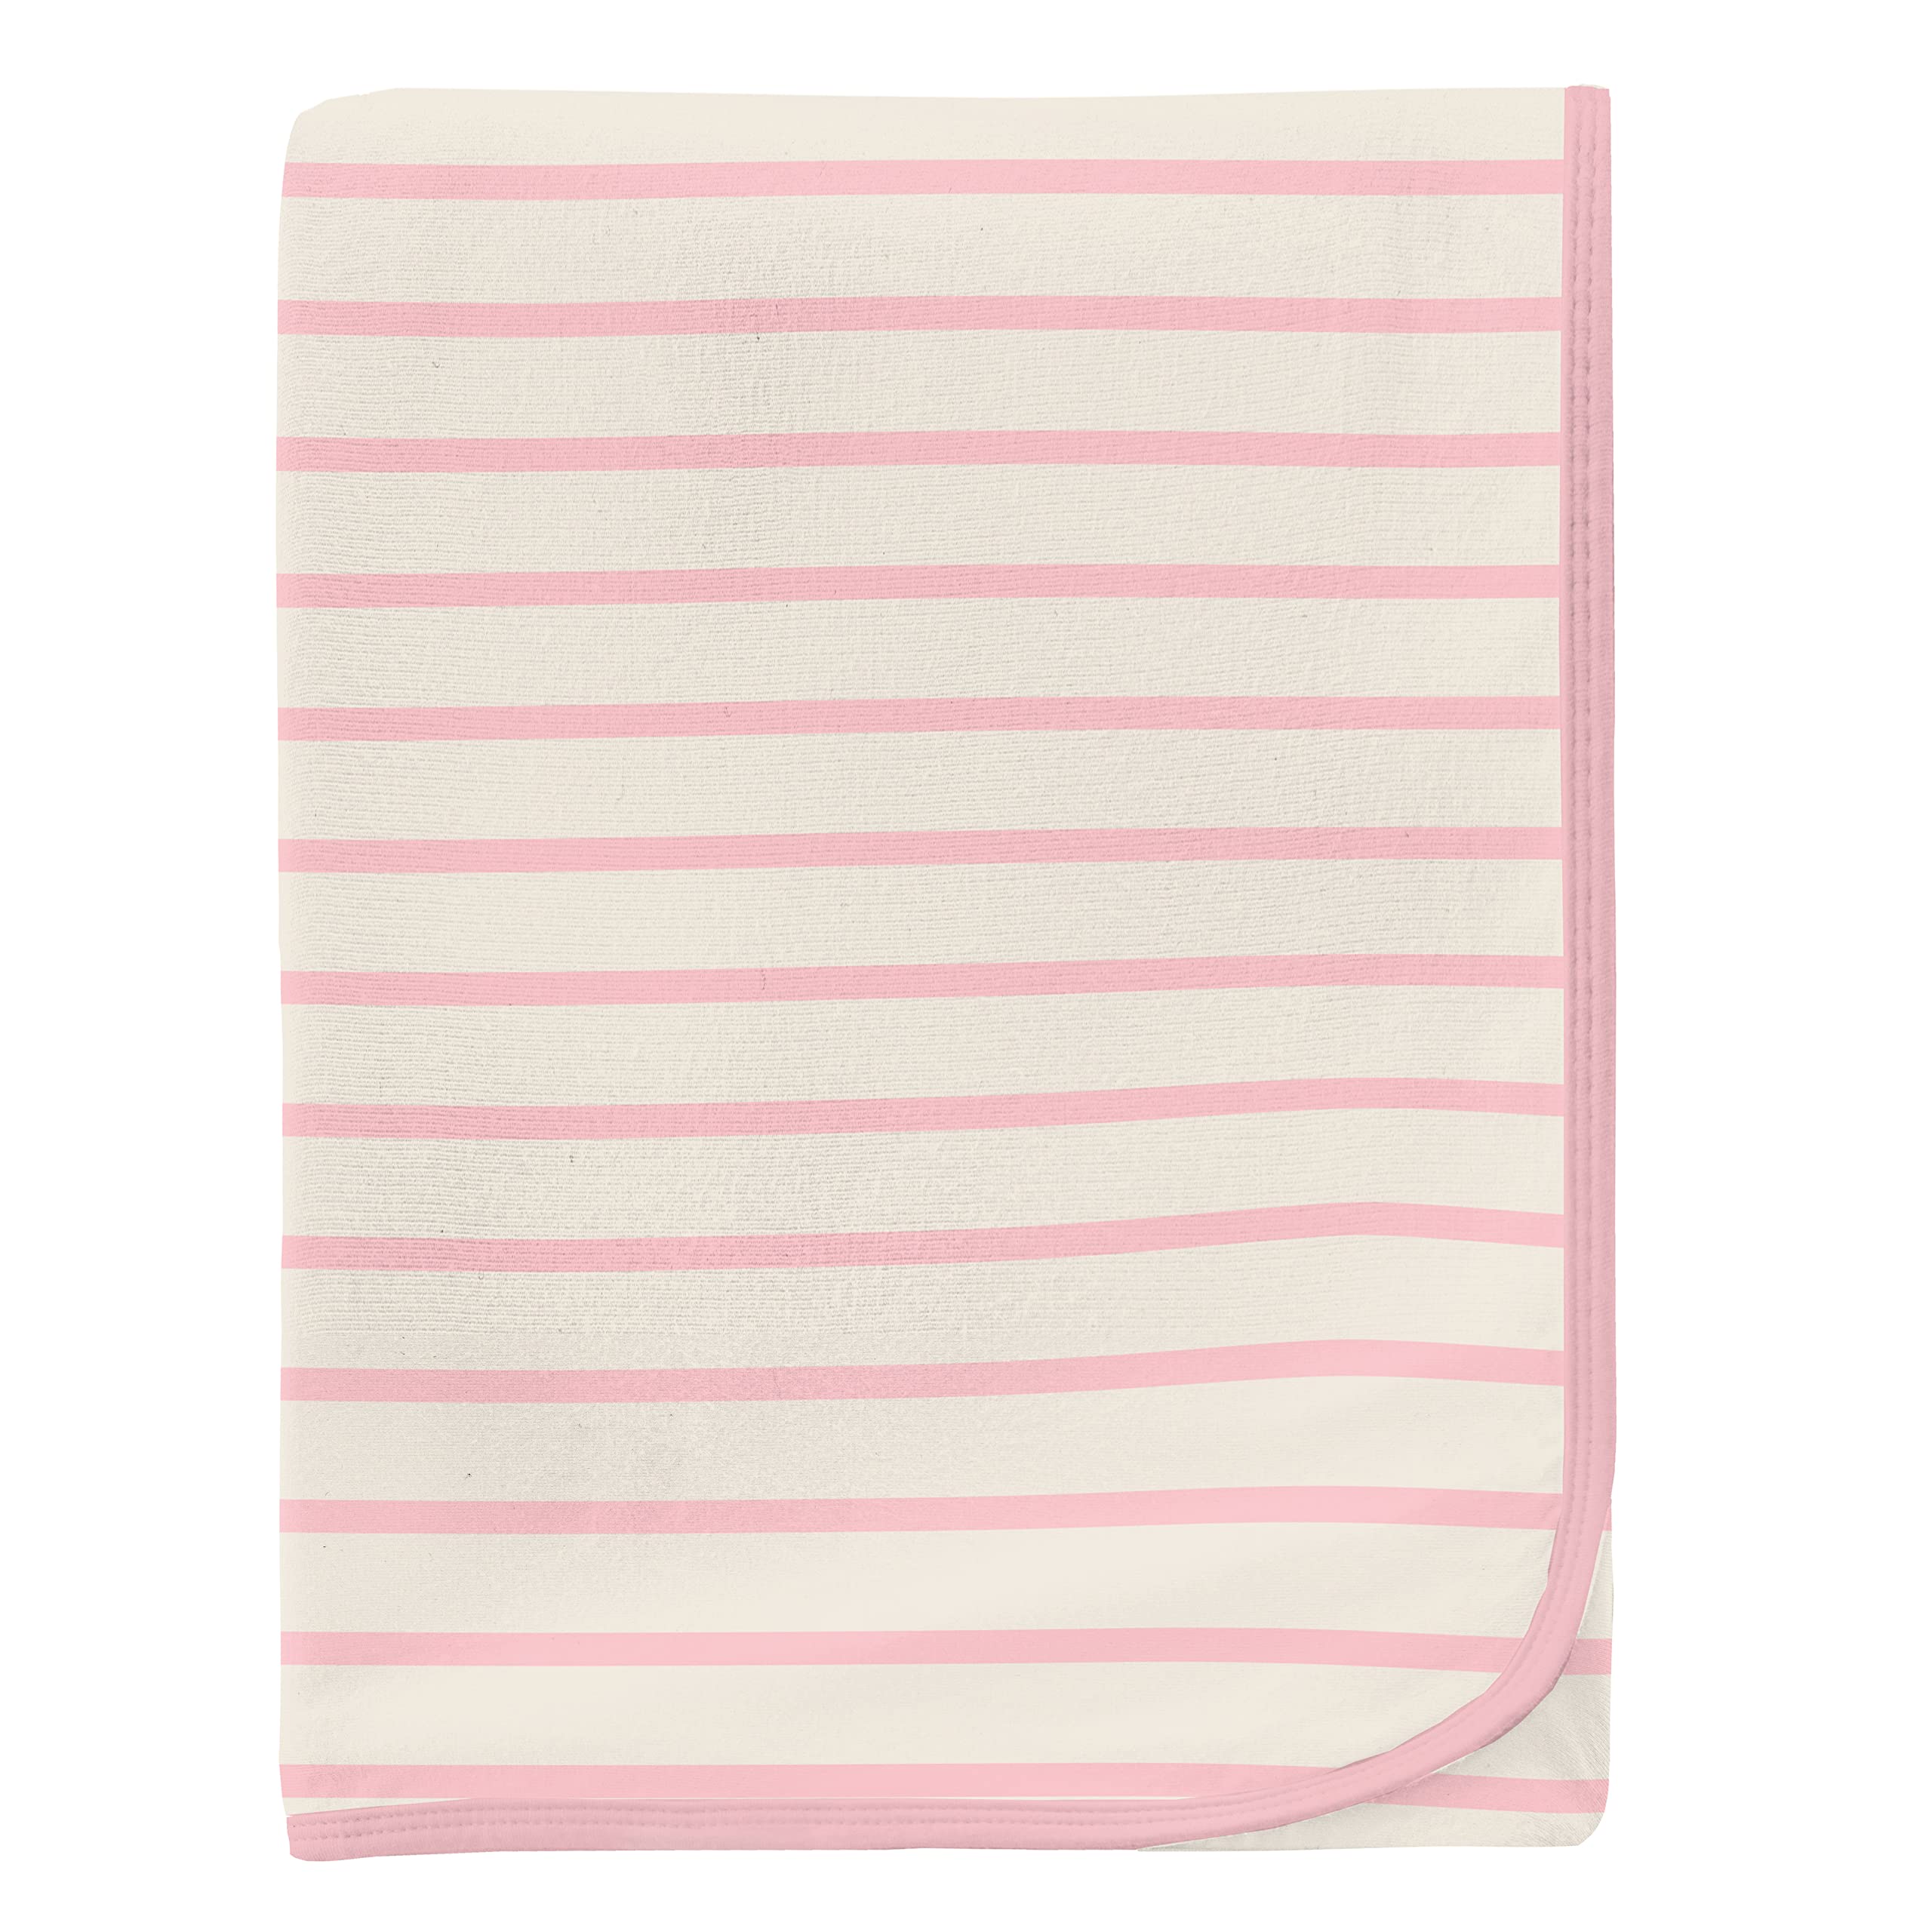 KicKee Pants Swaddling Blanket, Made from Luxuriously Soft KicKee Signature Blend Bamboo Fabric, Buttery Softness for Snuggling Your Baby (Lotus Sweet Stripe - One Size)